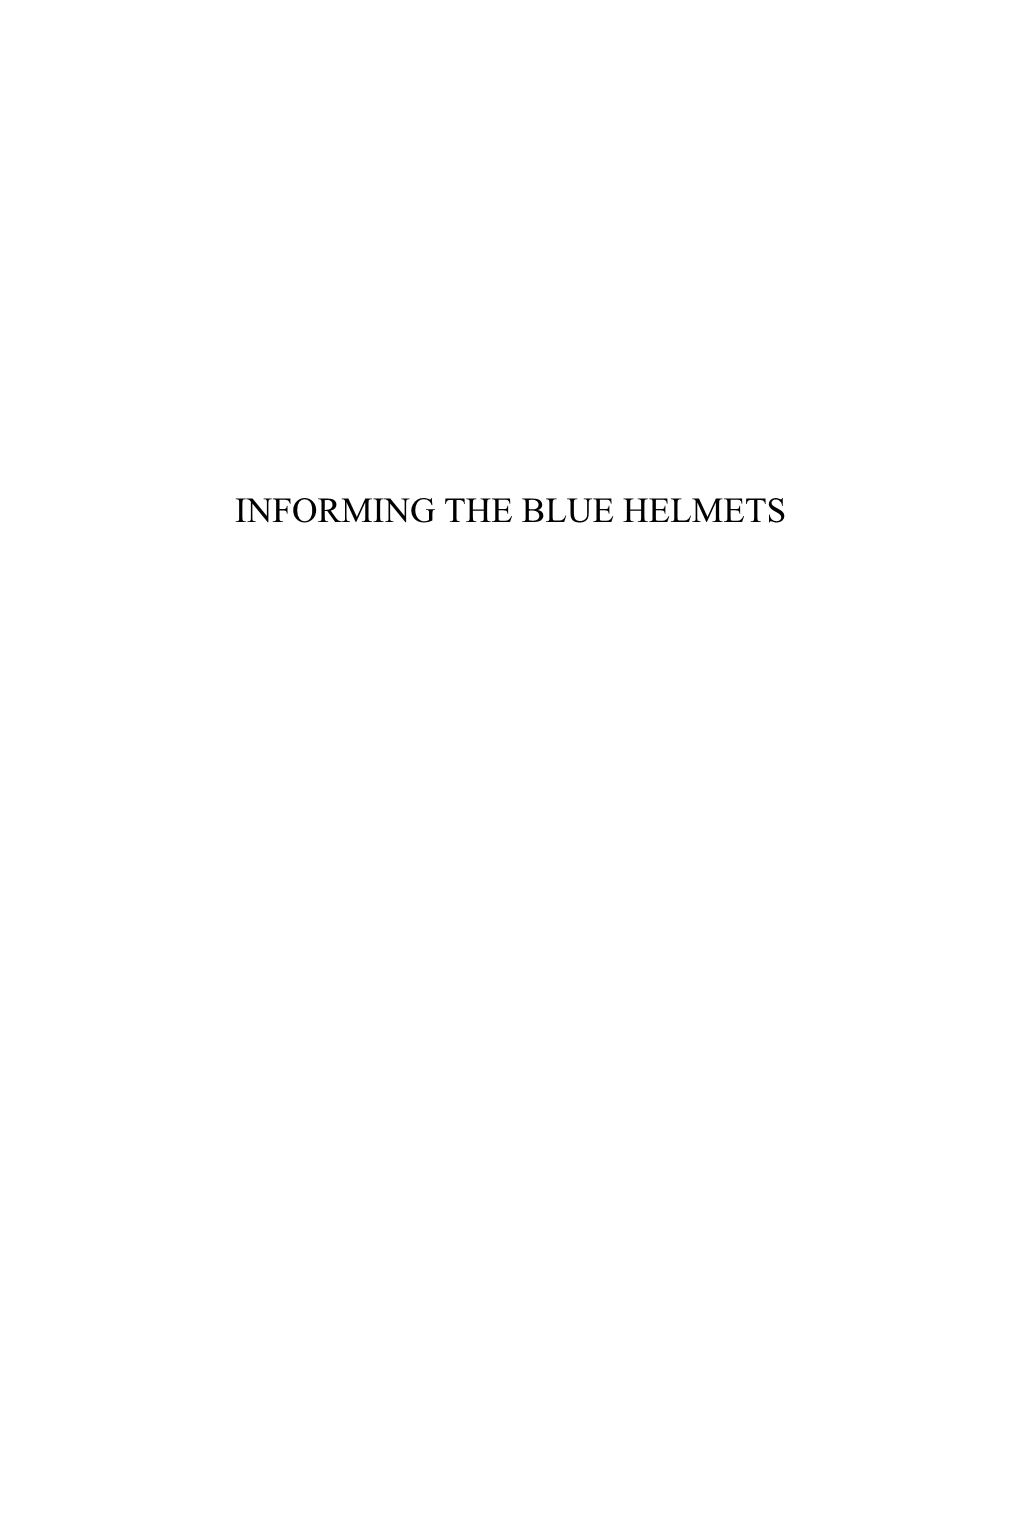 Informing the Blue Helmets: the United States, Un Peacekeeping Operations, and the Role of Intelligence